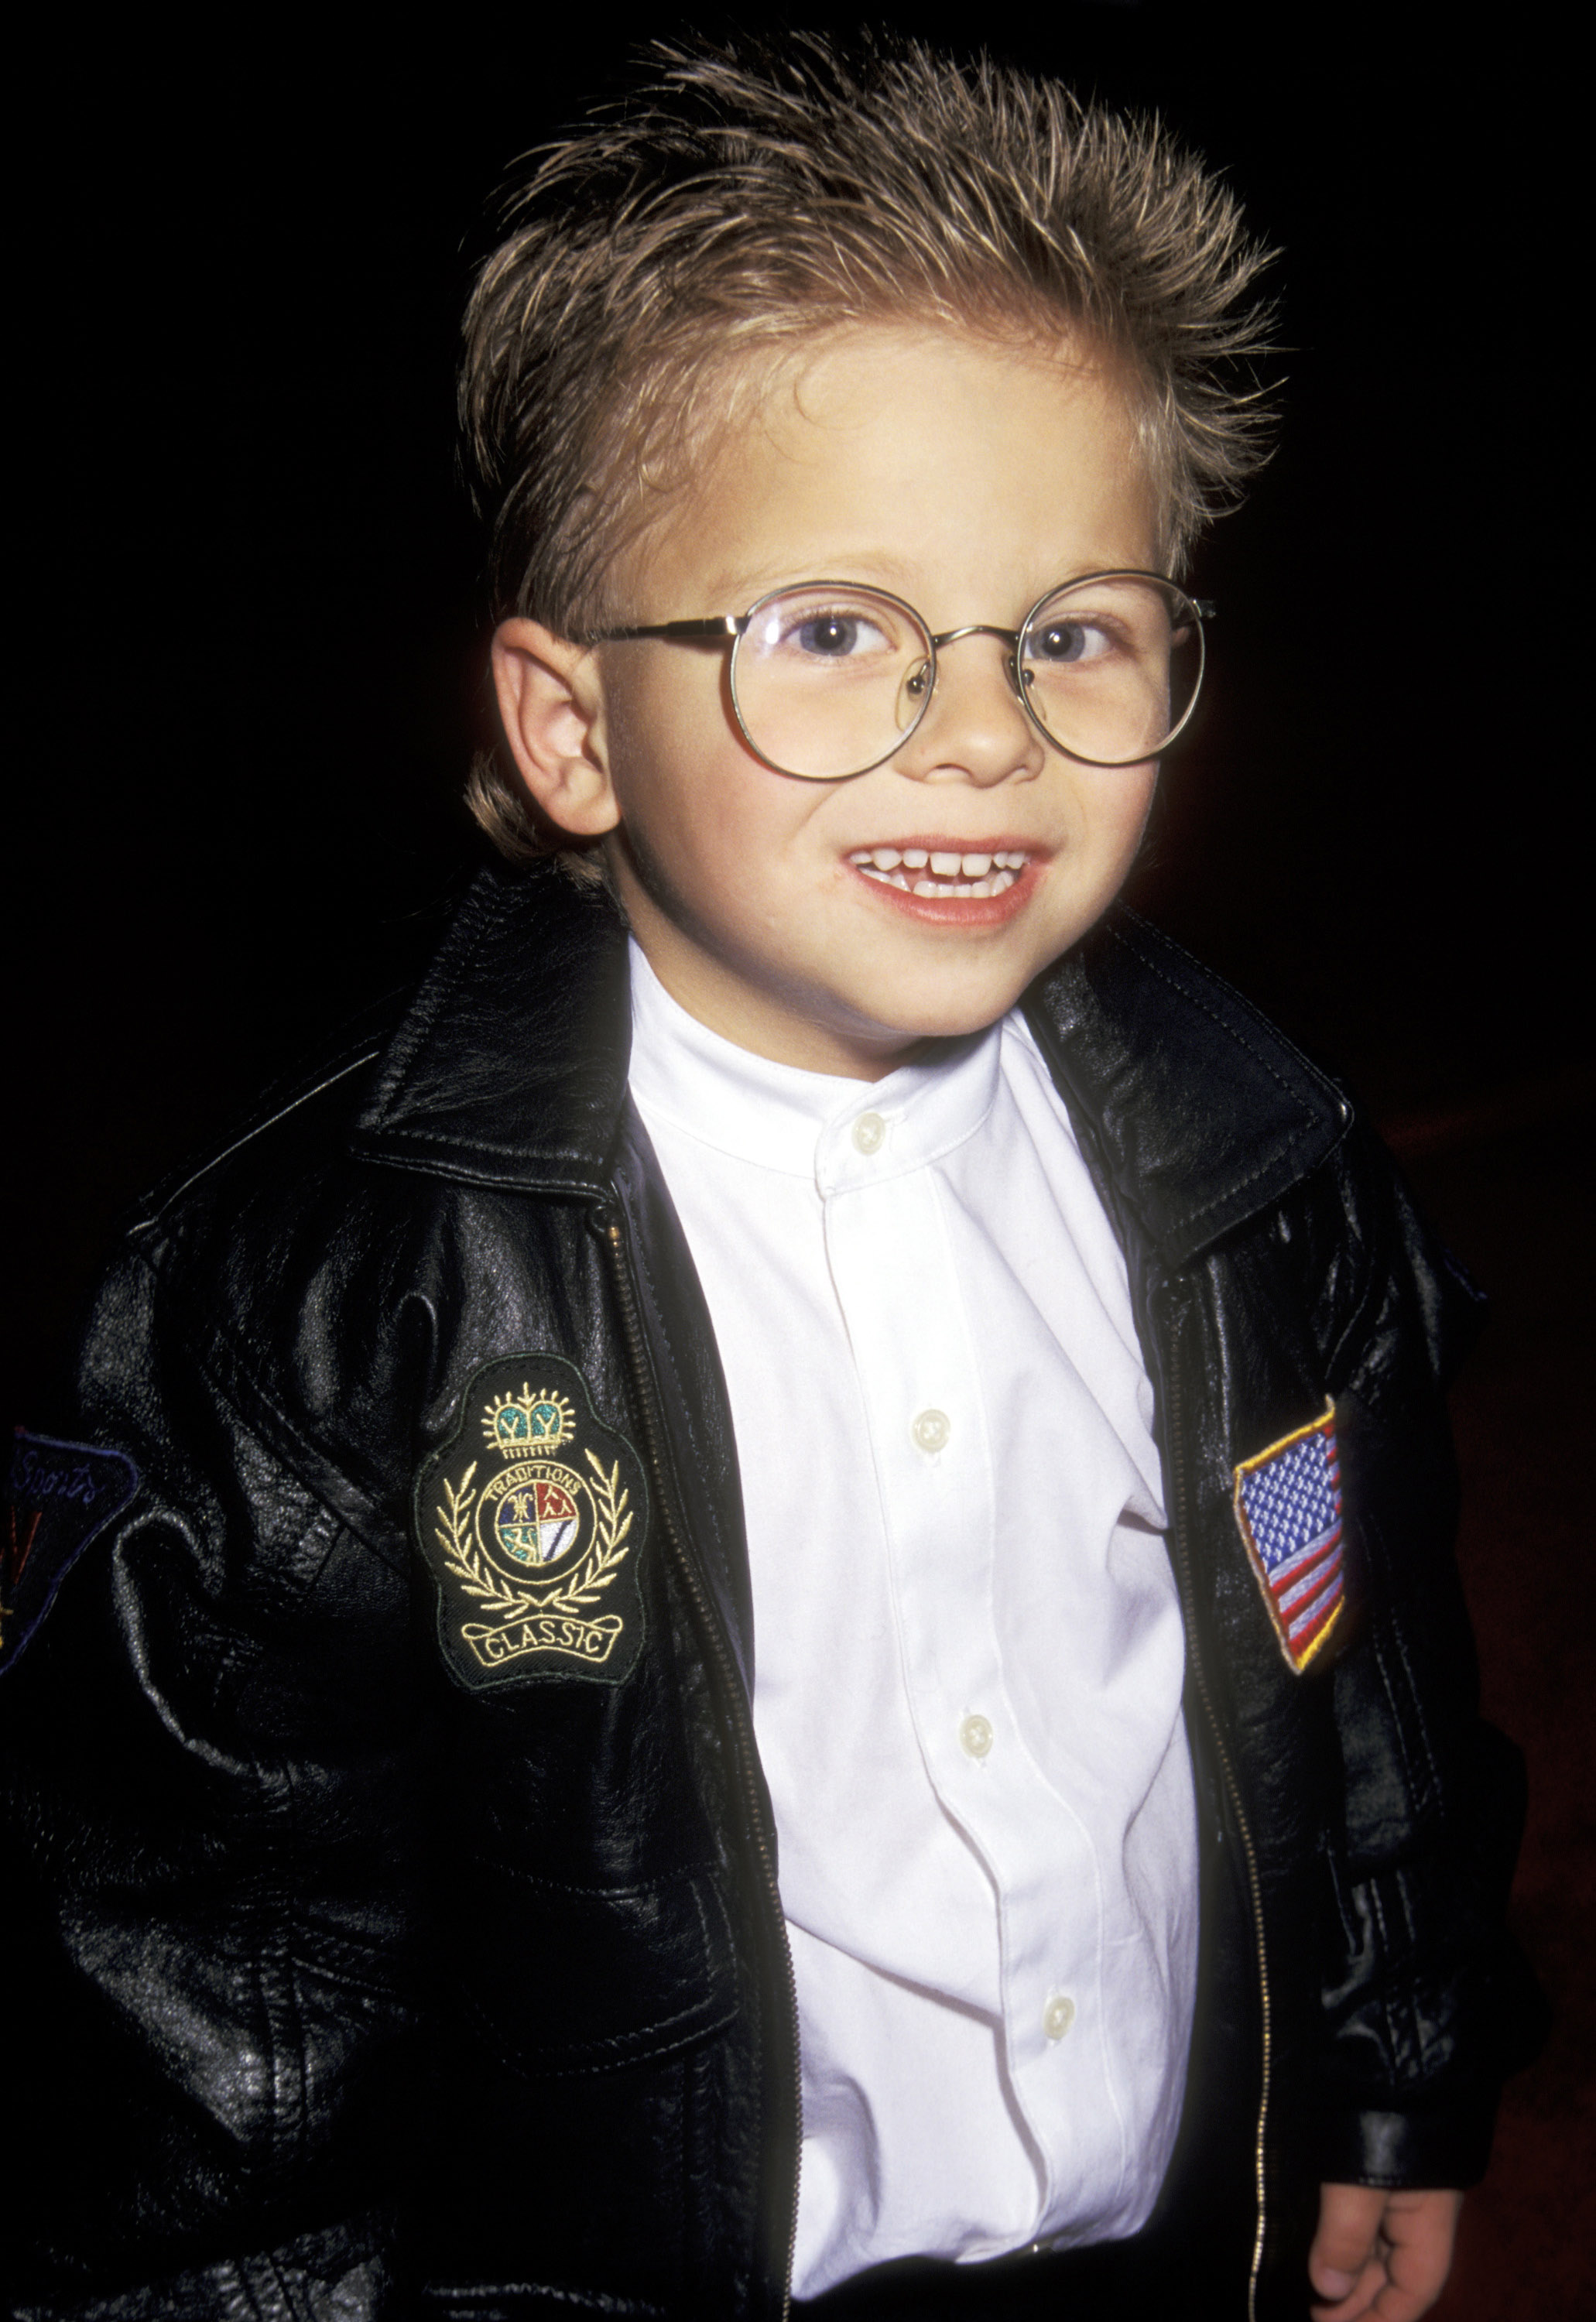 <p>Jonathan Lipnicki made his film debut at 6 alongside Tom Cruise and Renee Zellweger in 1996's "Jerry Maguire." (He had us at "Did you know the human head weighs 8 pounds?") Starring roles in "Stuart Little" and "Like Mike" soon followed.</p>